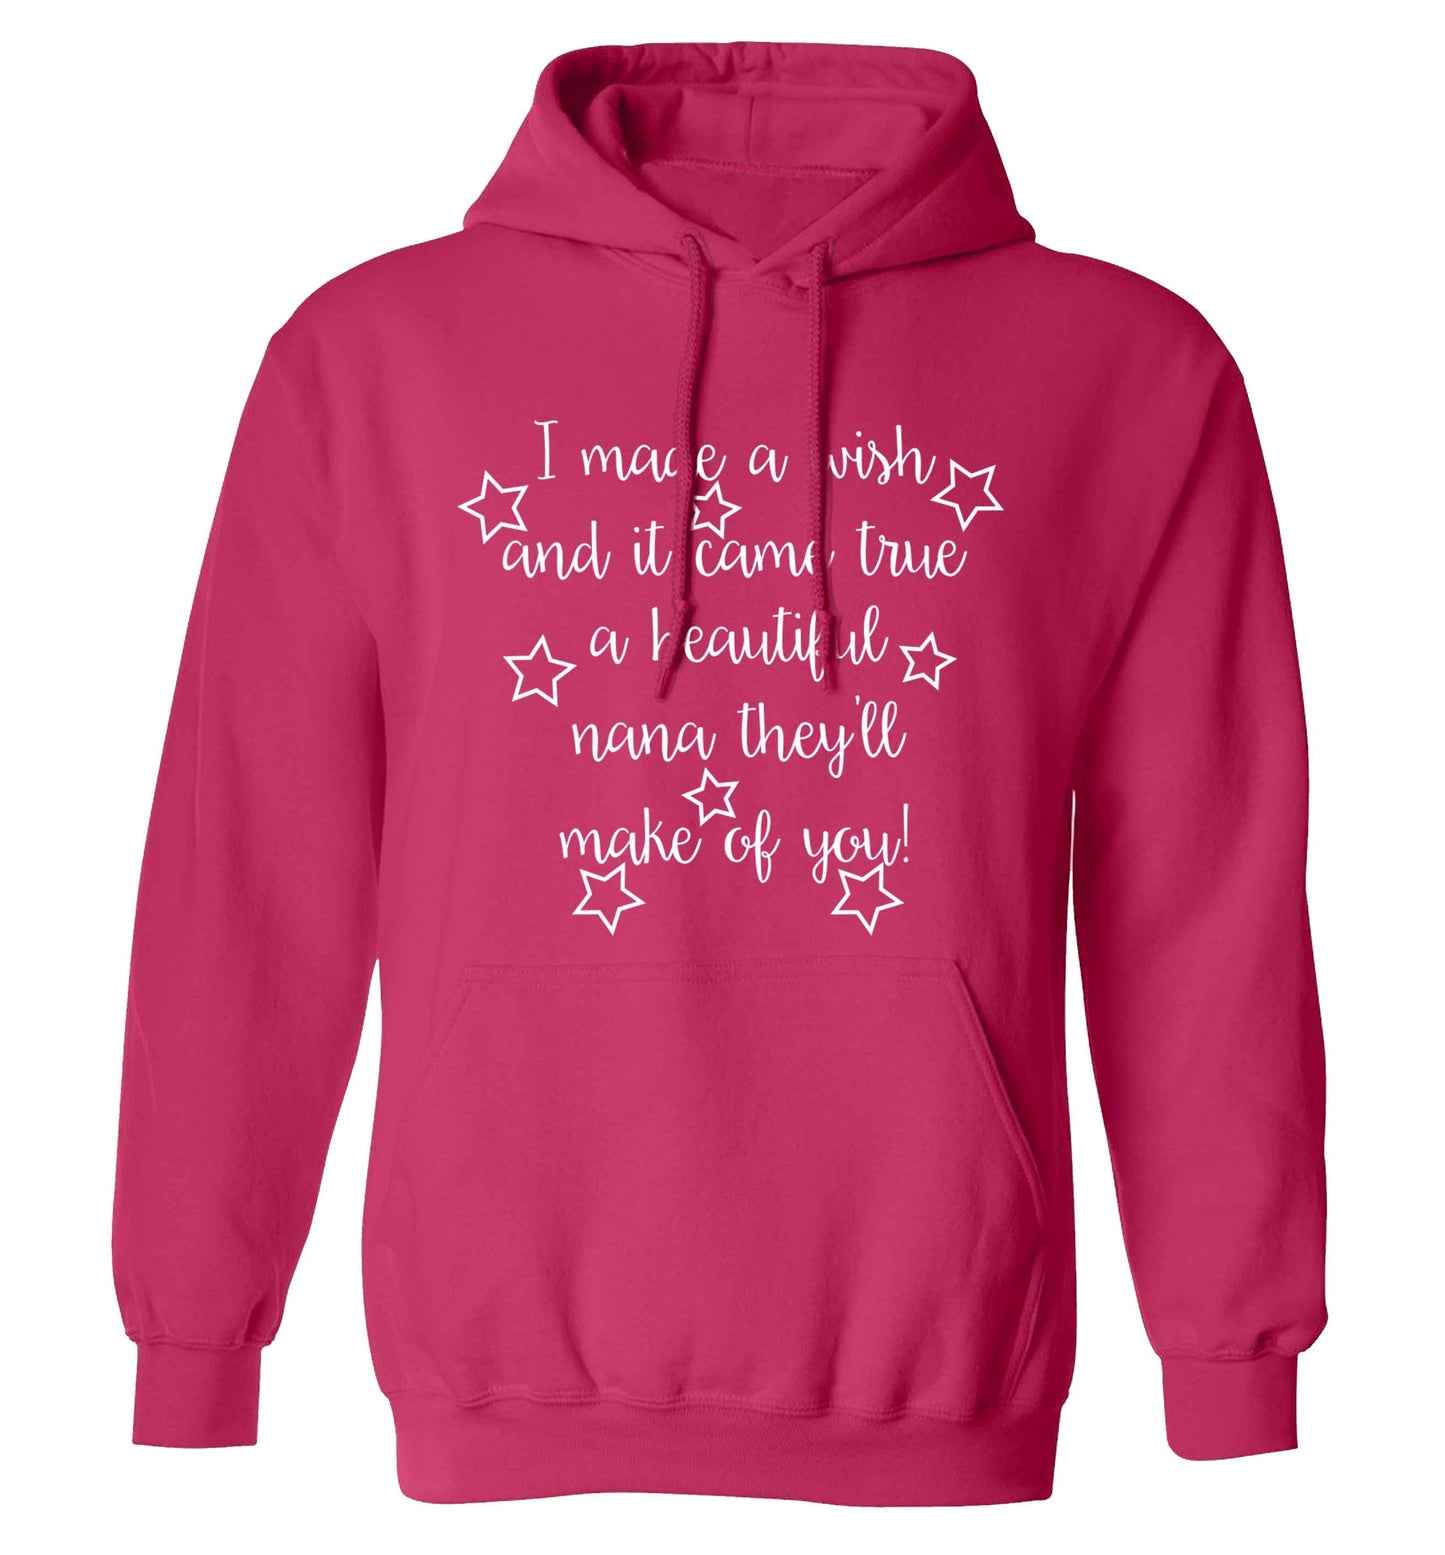 I made a wish and it came true a beautiful nana they'll make of you! adults unisex pink hoodie 2XL